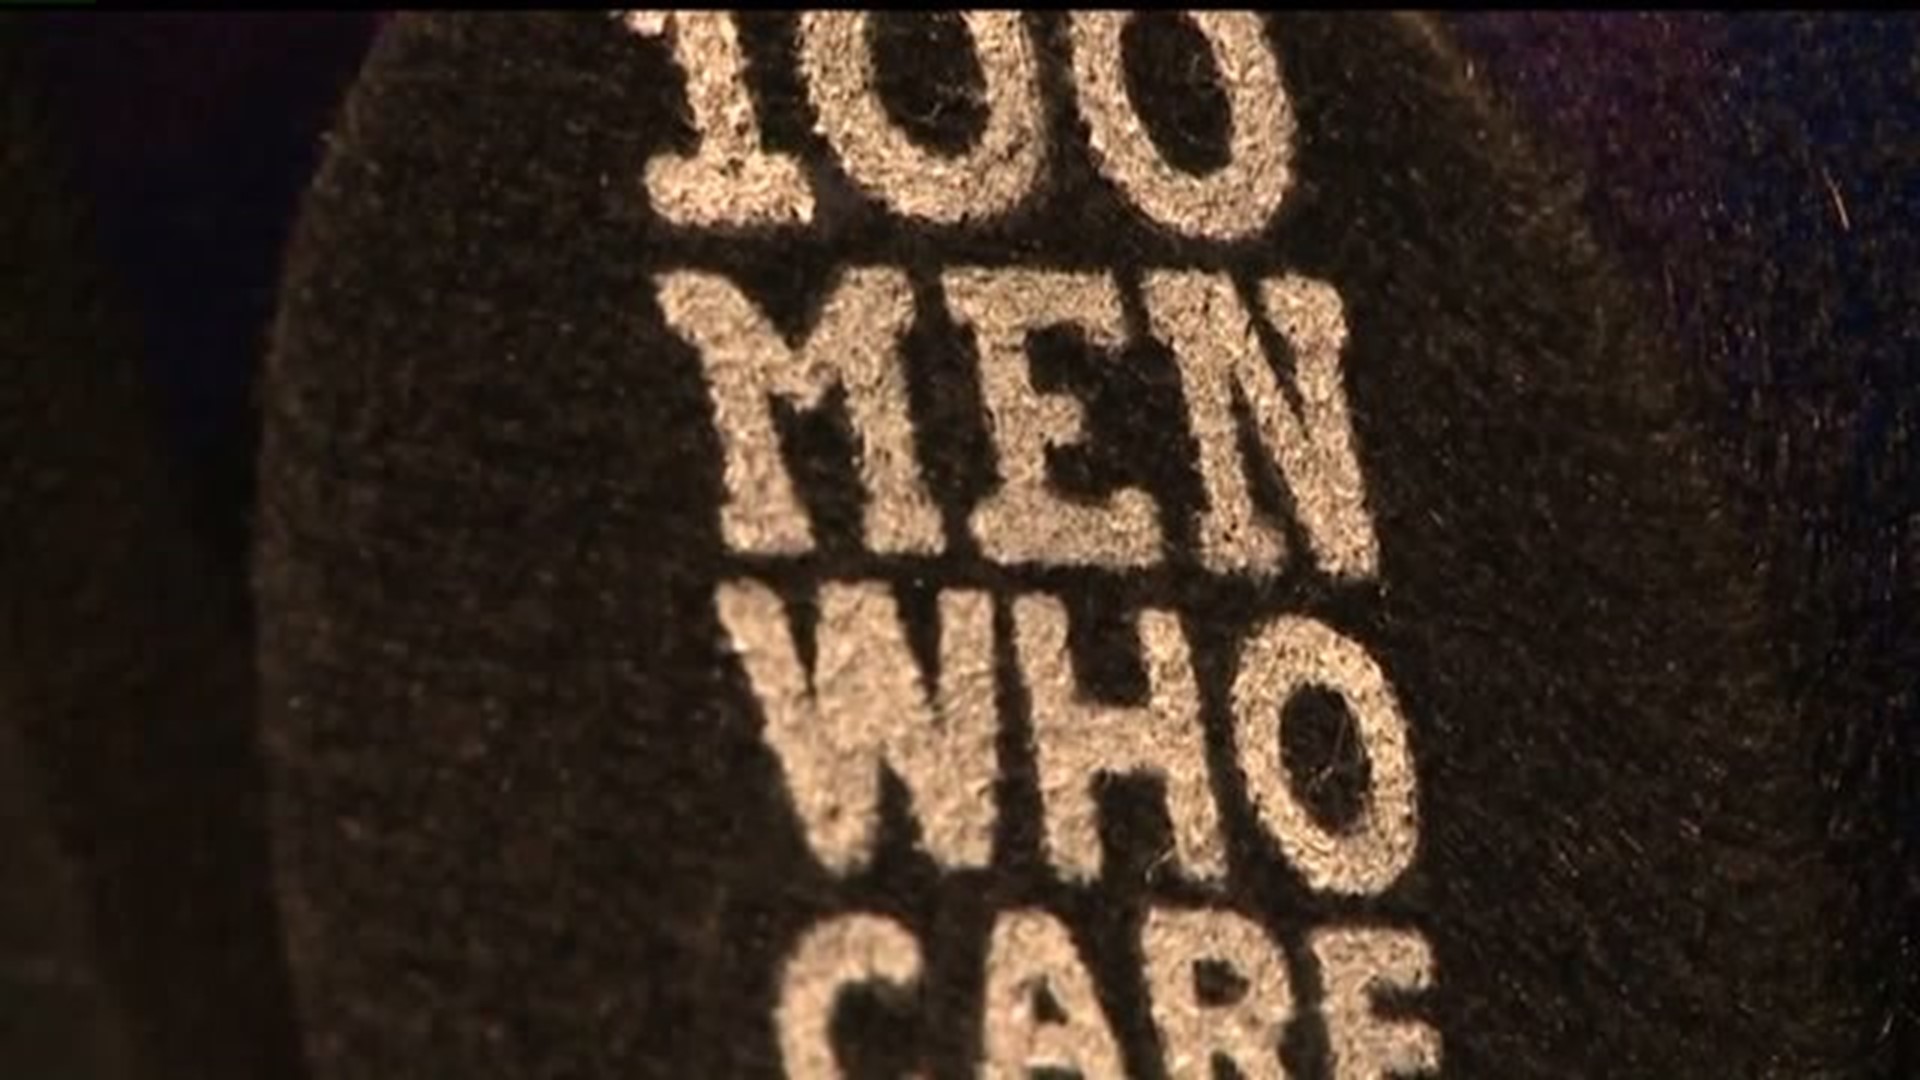 `100 Men Who Care` bring hope to Lancaster County charities